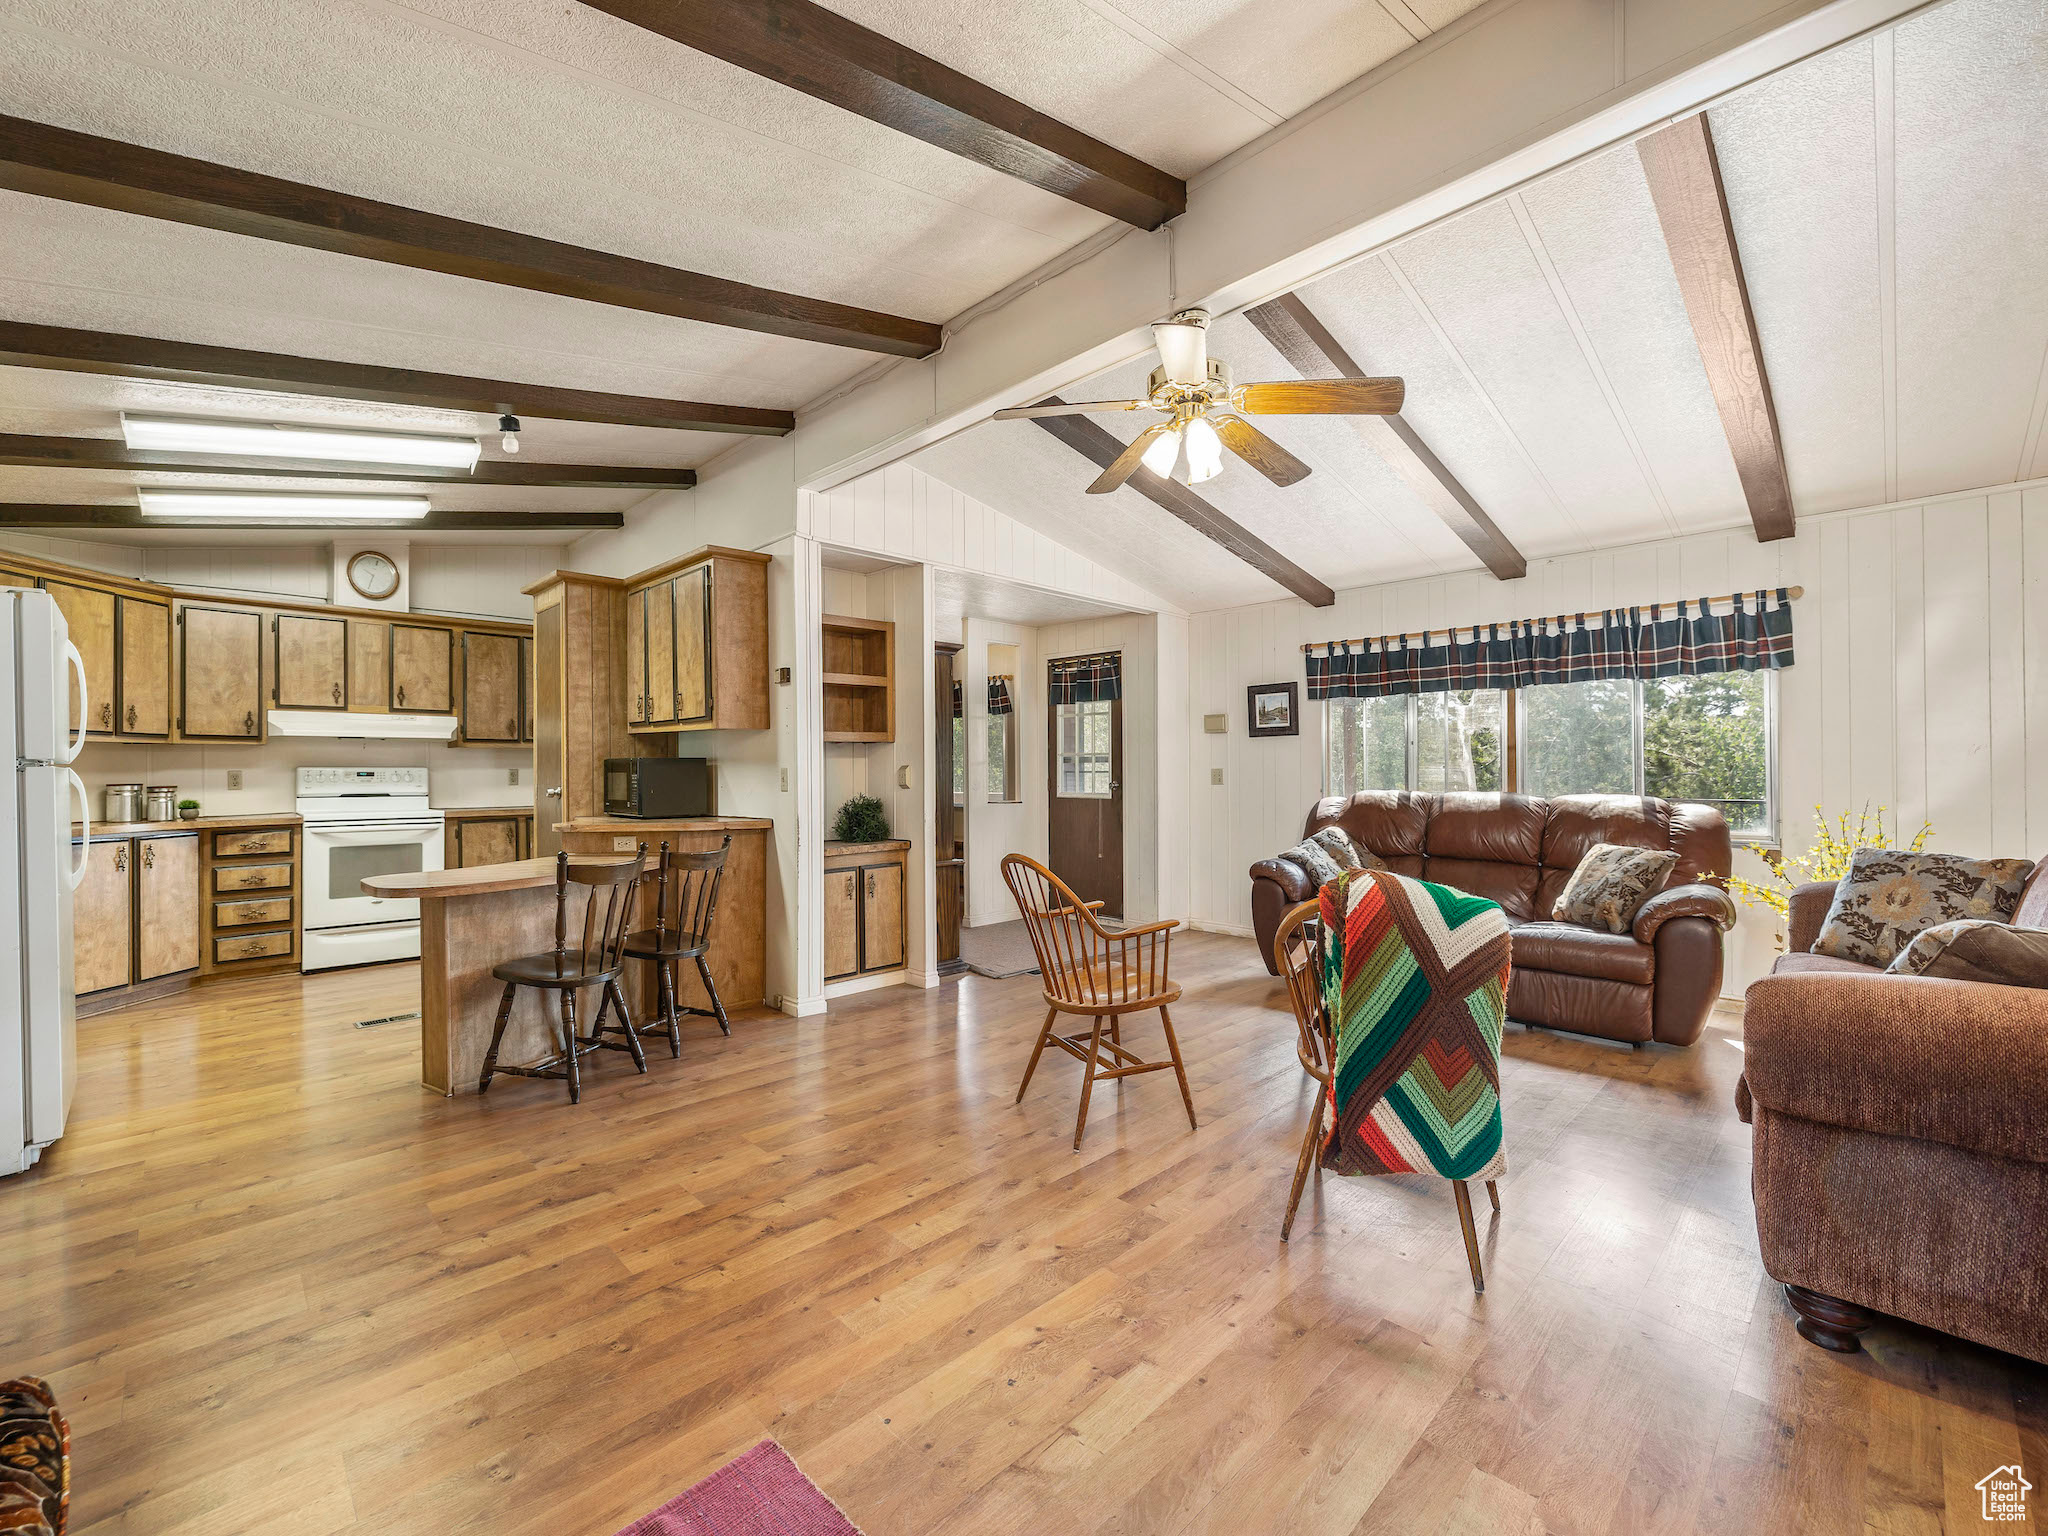 Living room with ceiling fan, light hardwood / wood-style floors, and vaulted ceiling with beams